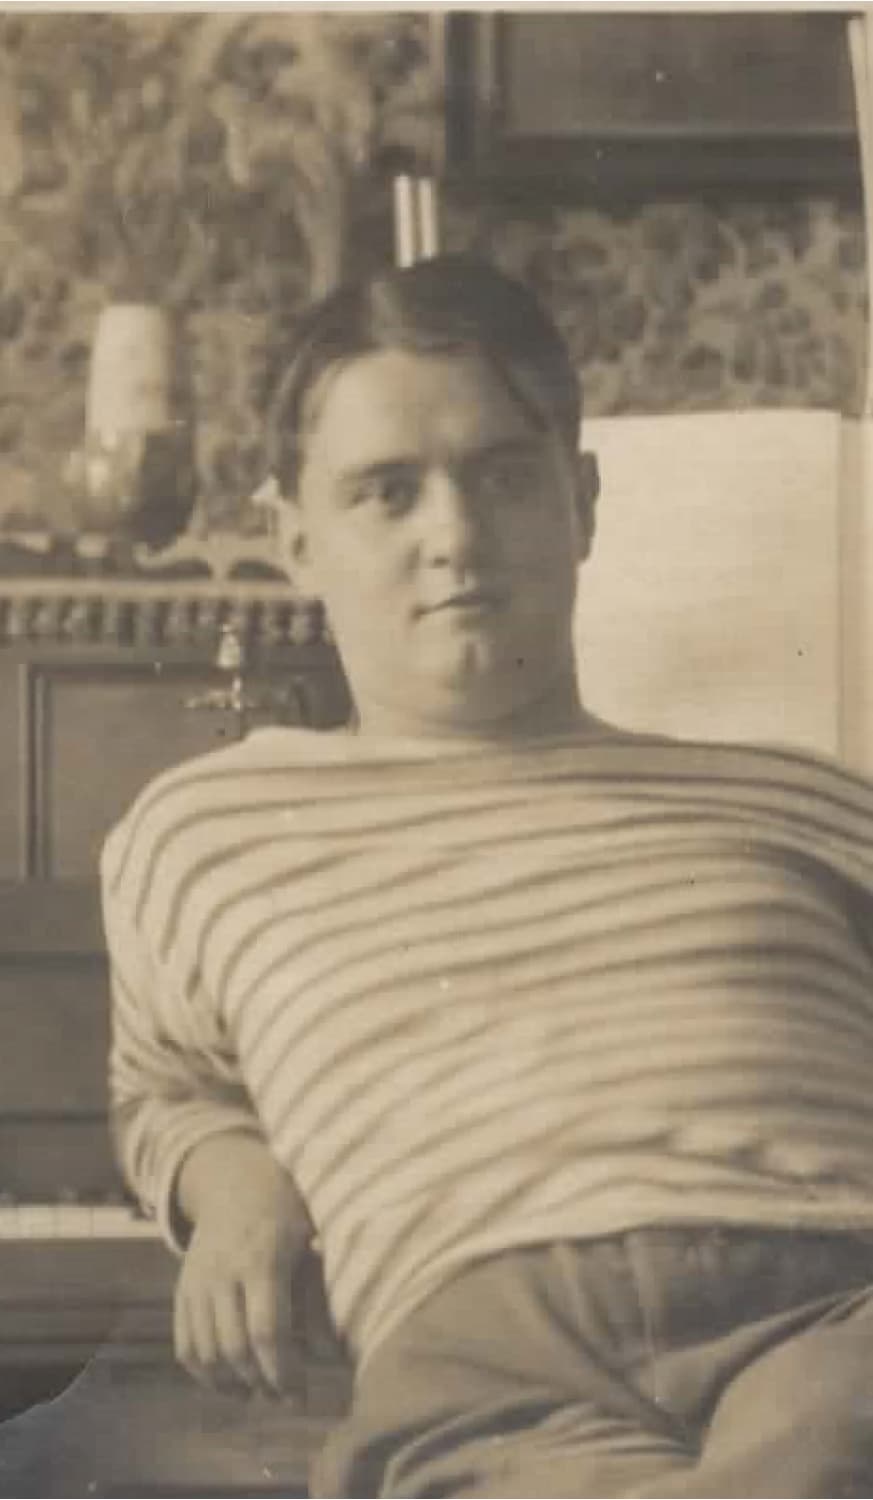 The young Georges Auric